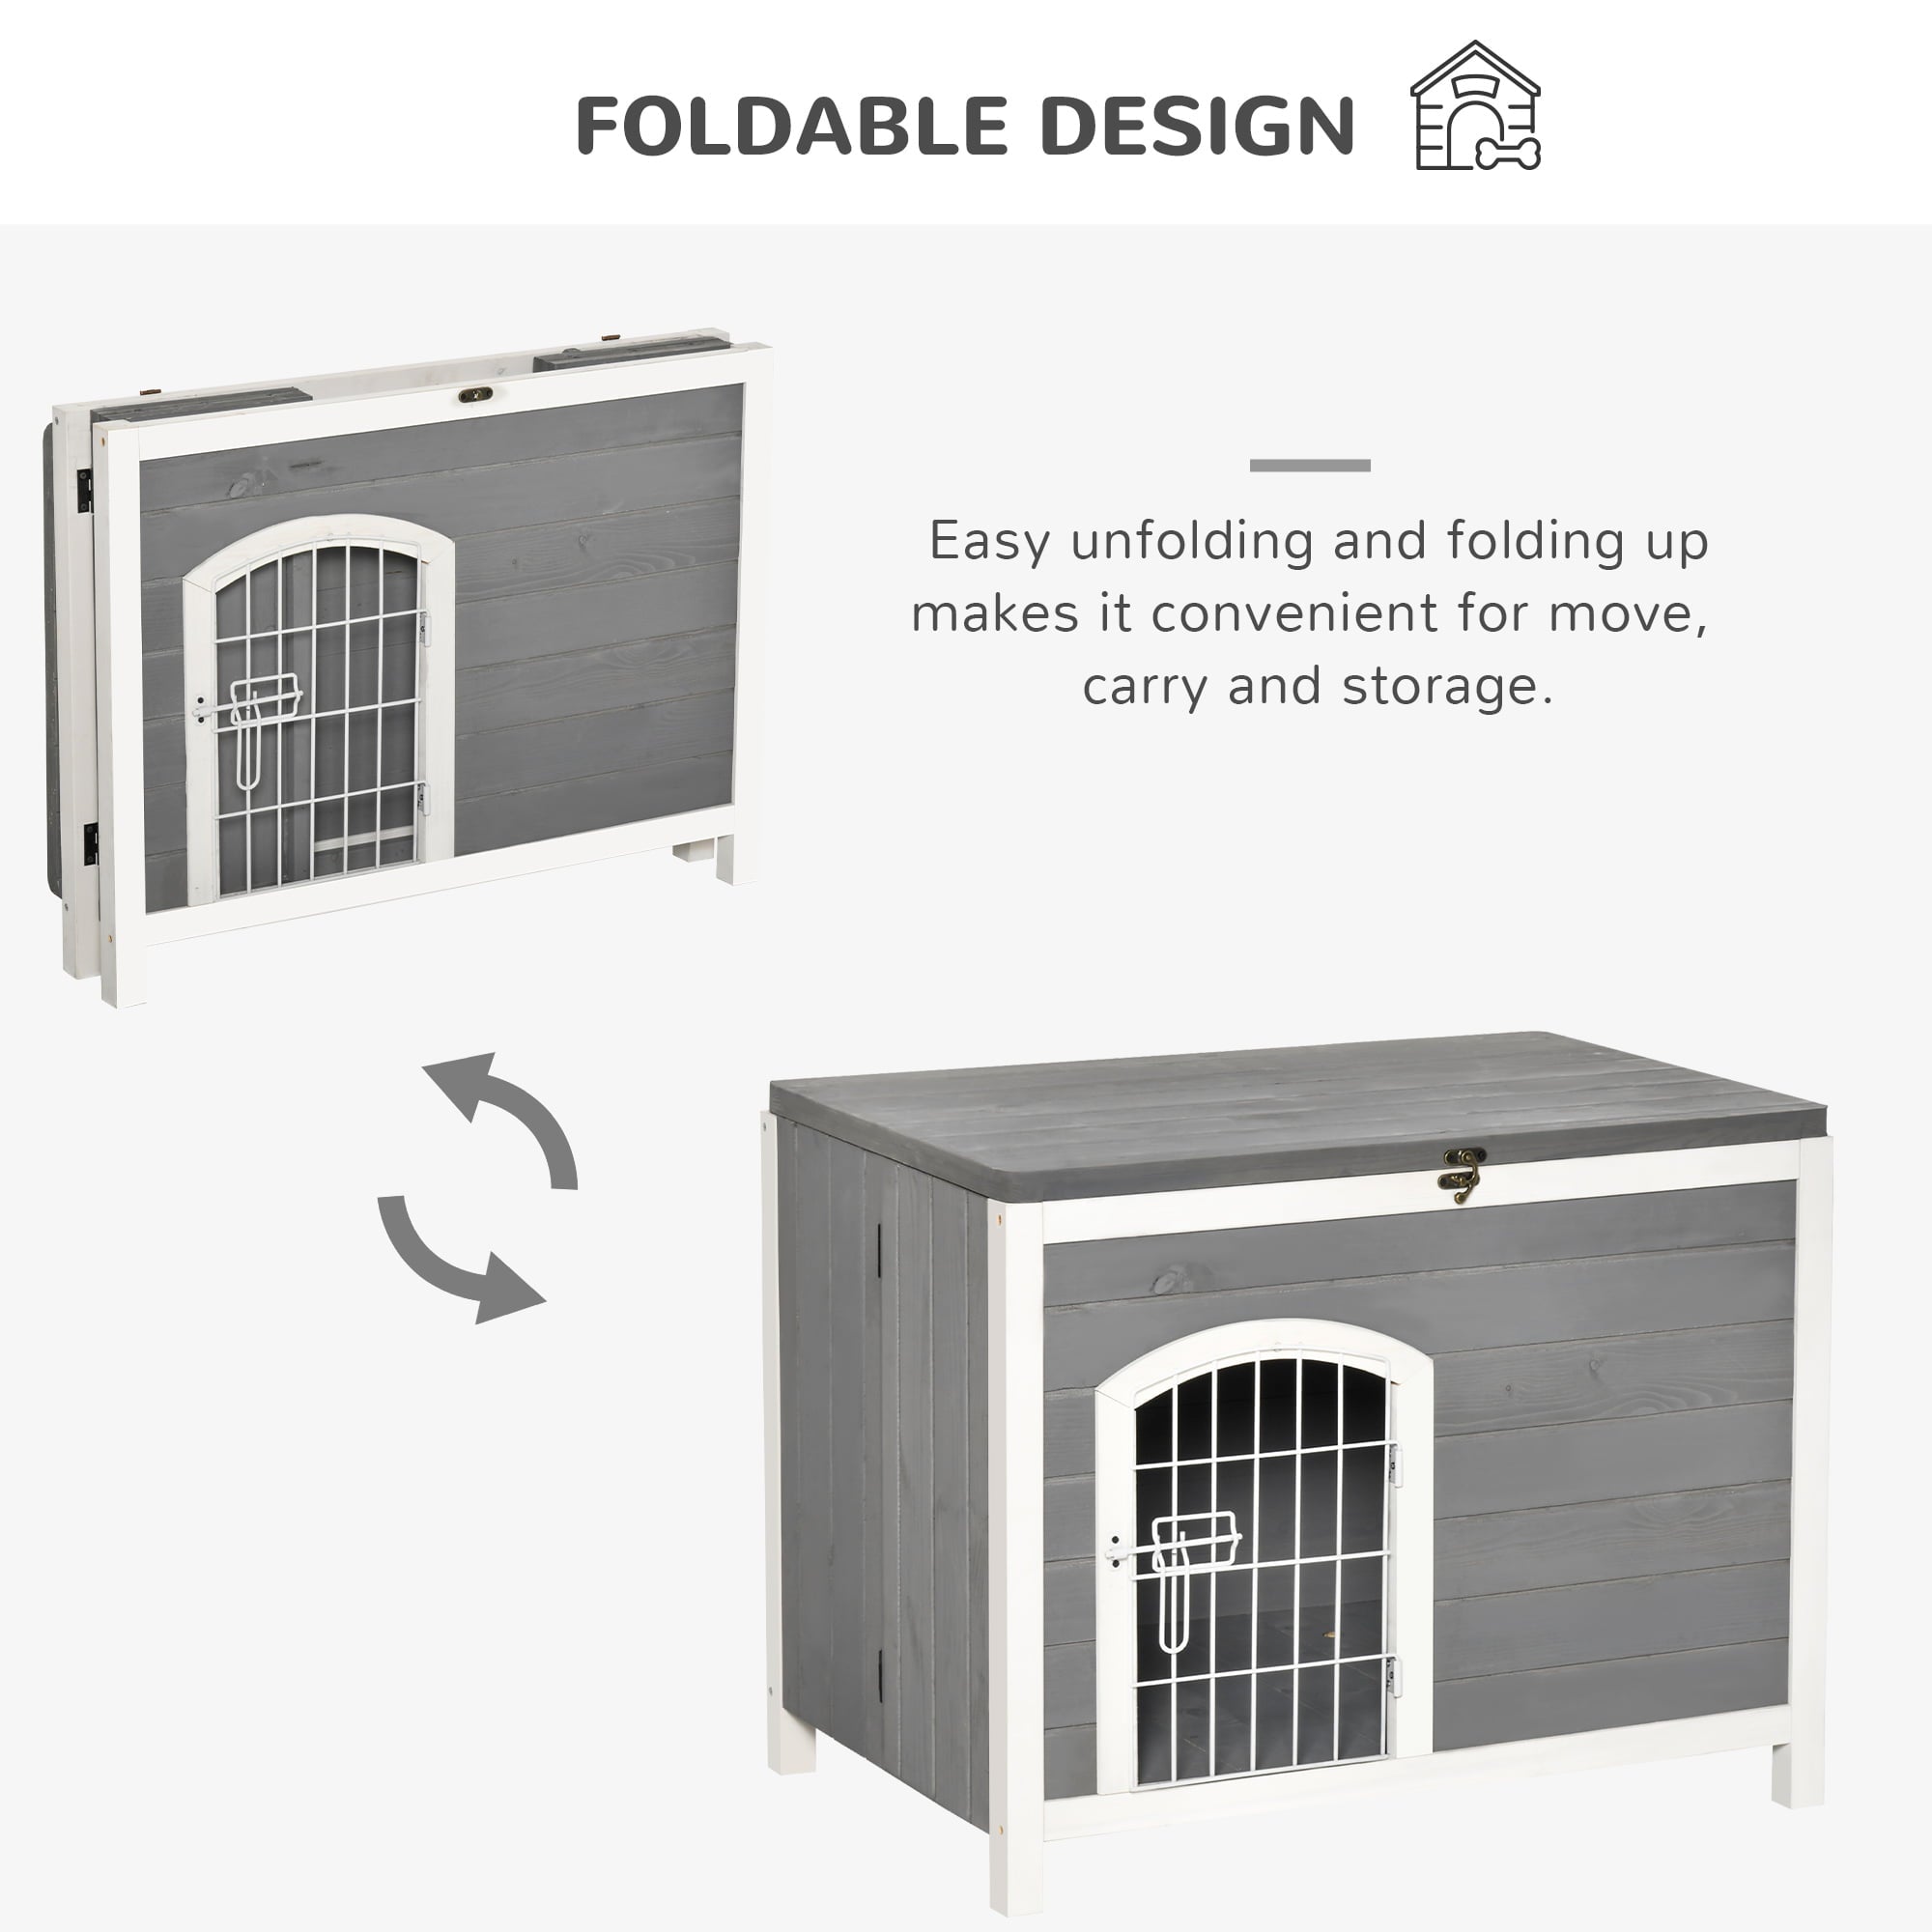 Tomshoo Foldable Raised Wooden Dog House Indoor and Outdoor Dog Cage Kennel Cat House w/ Lockable Door Openable Roof Removable Bottom for Small and Medium Pets Grey